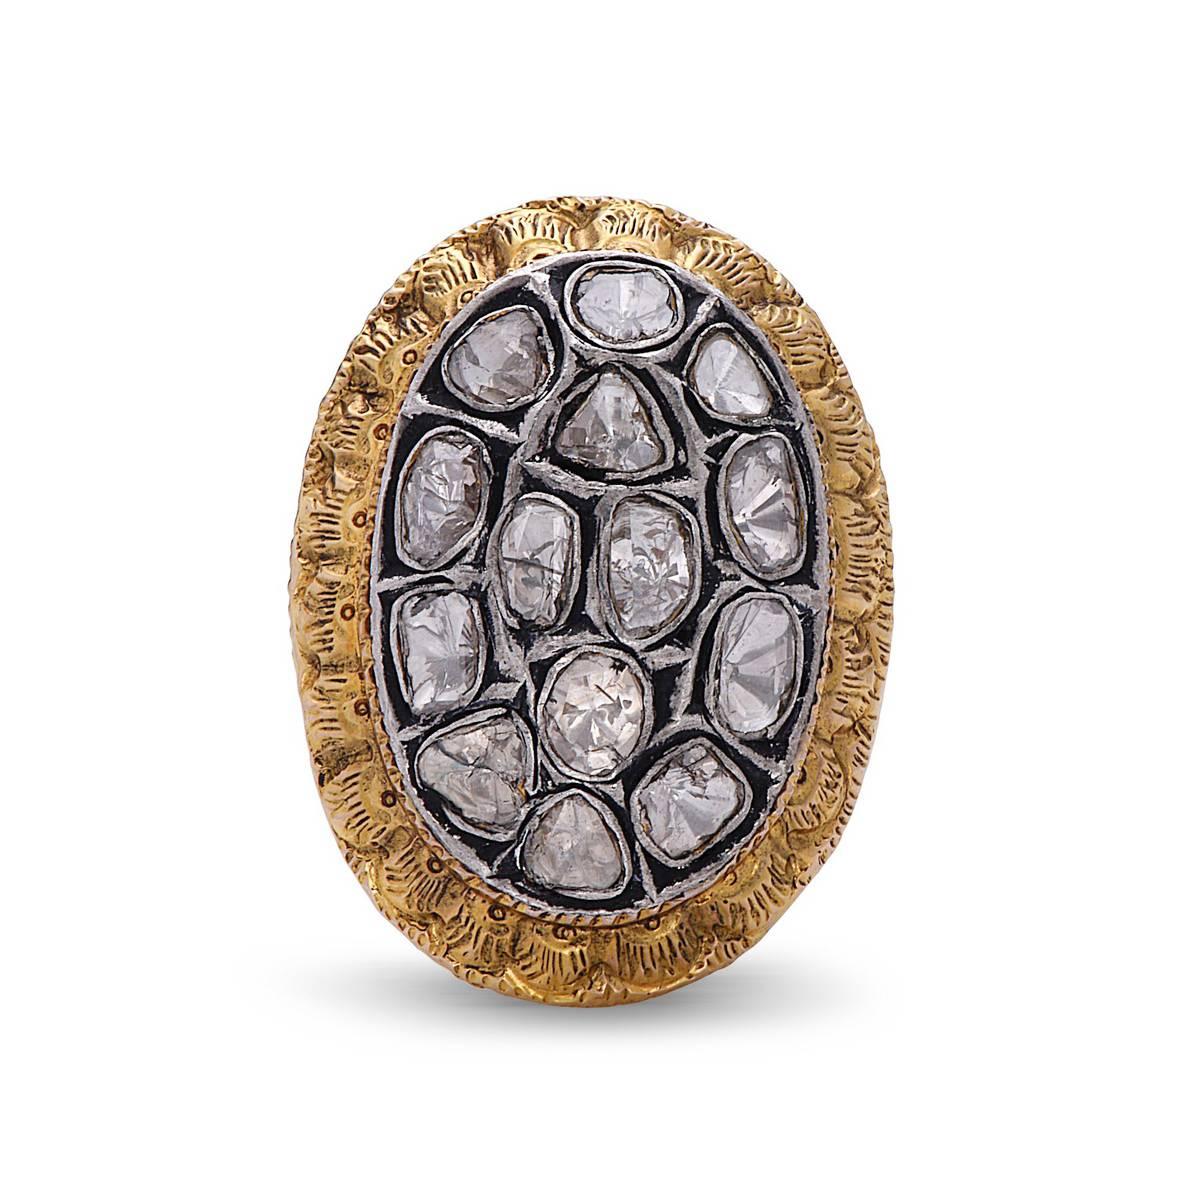 Feel like a princess when you put this gorgeous oval shape vintage looking 14K gold & silver ring with beautiful embossed gold work around diamonds and on the shank. 

Ring size: 6.75 (can be sized) 
14k Gold: 9.05gms 
D:1.29cts
               